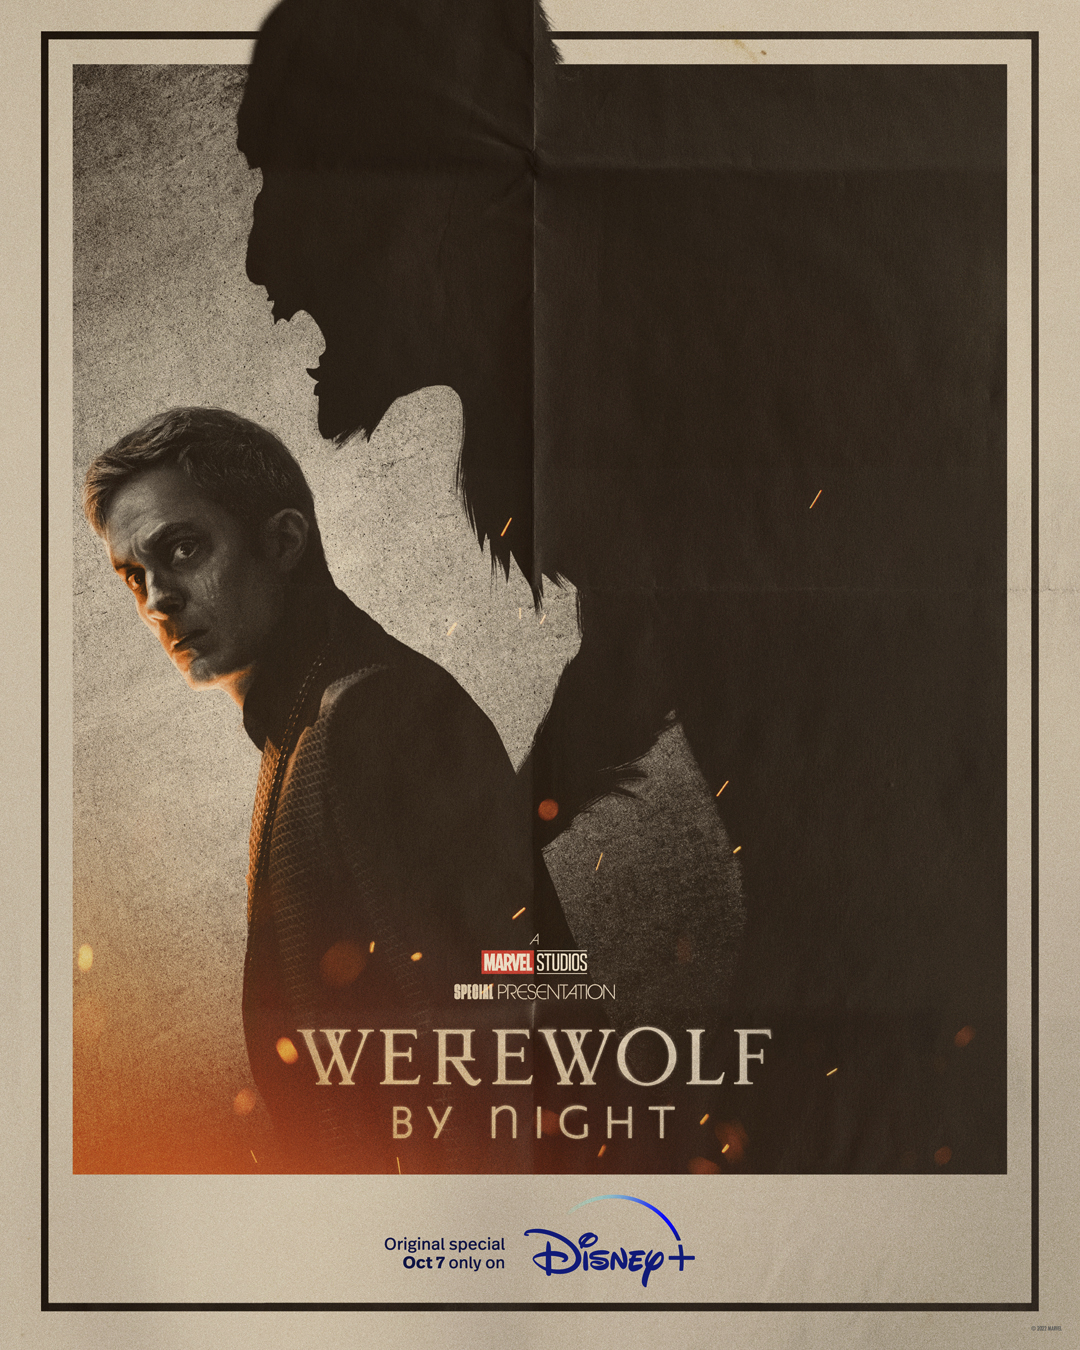 The poster for the Disney+ special "Werewolf By Night" shows the main character, Jack Russell, and his lupine shadow.